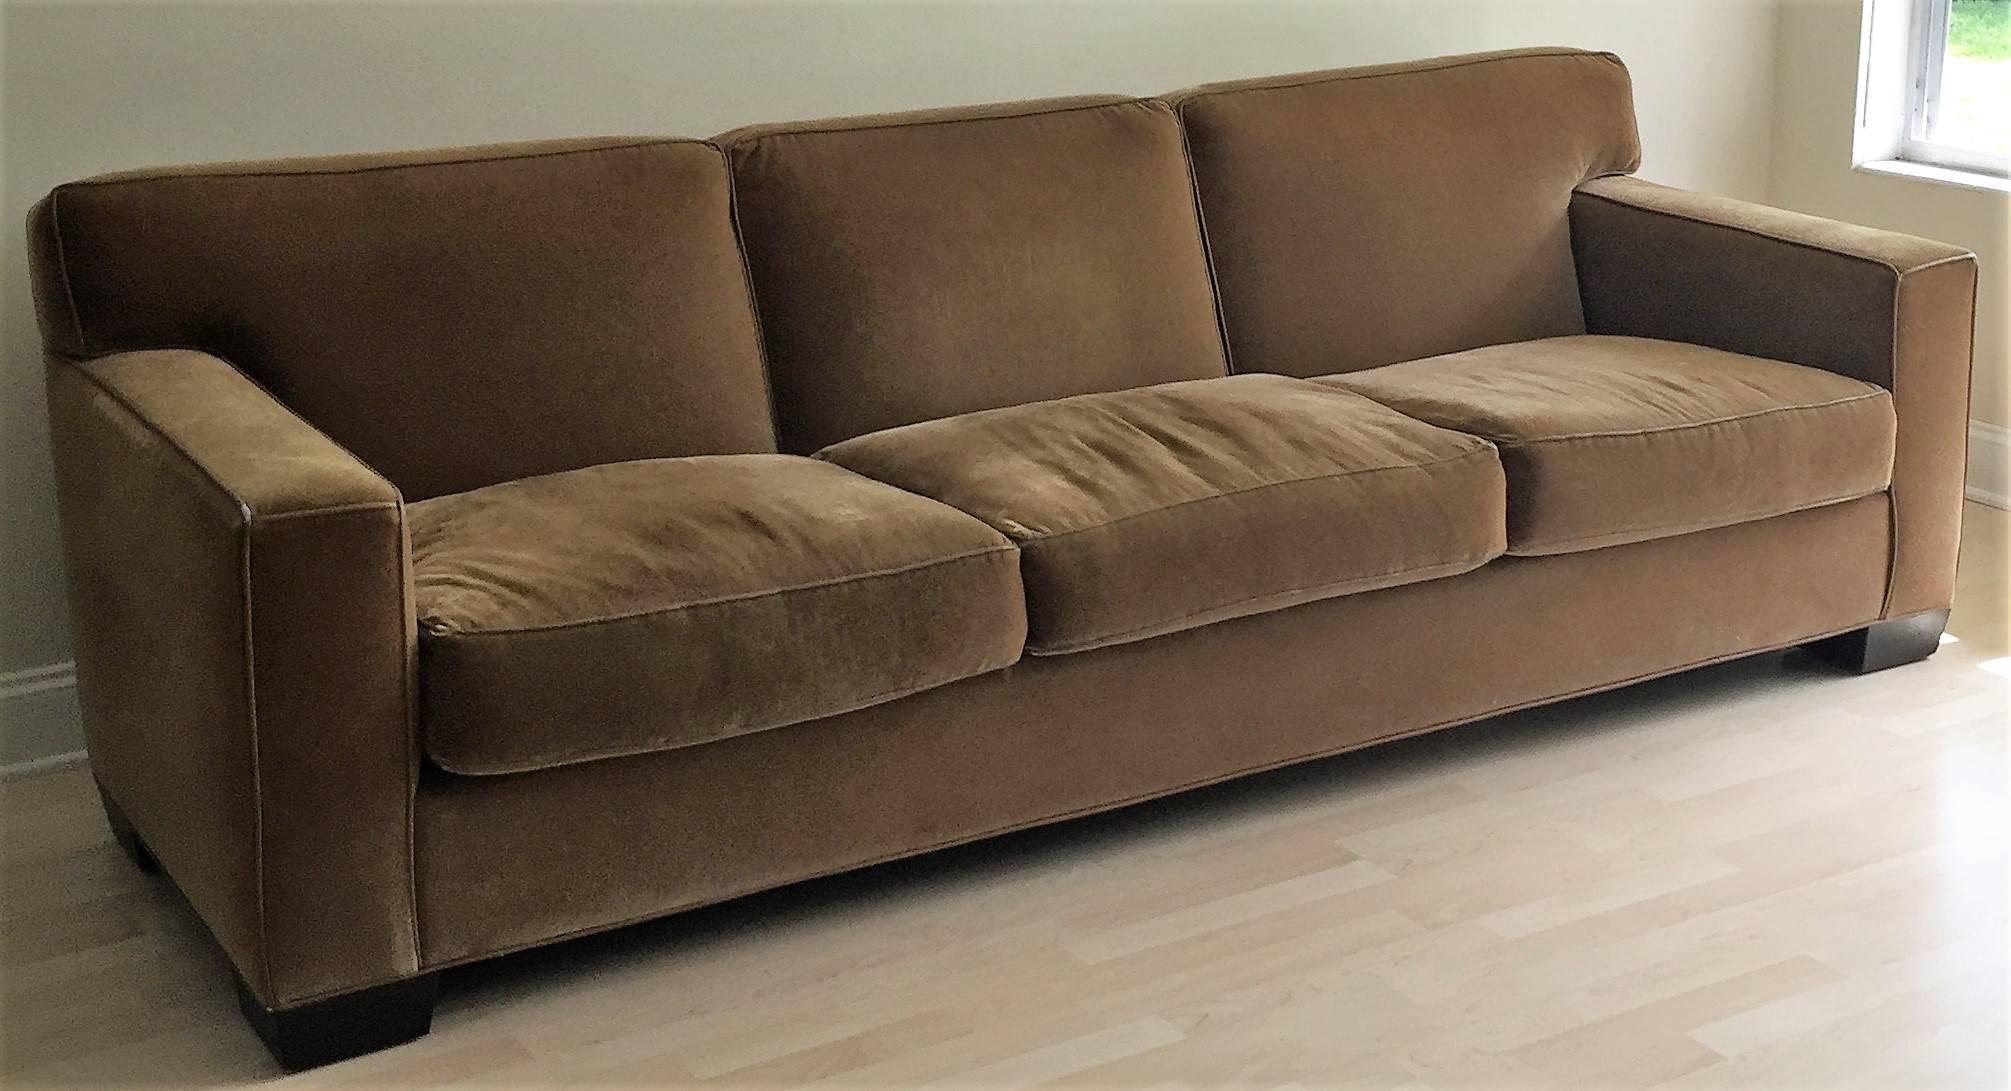 20th century Jean Michael Frank style Art Deco mohair three-seat sofa in rich caramel color. Custom crafted kiln-dried hardwood and sinuous spring construction by ELI WYN of Chicago. Features classic T-back and tapered square wood stained feet.